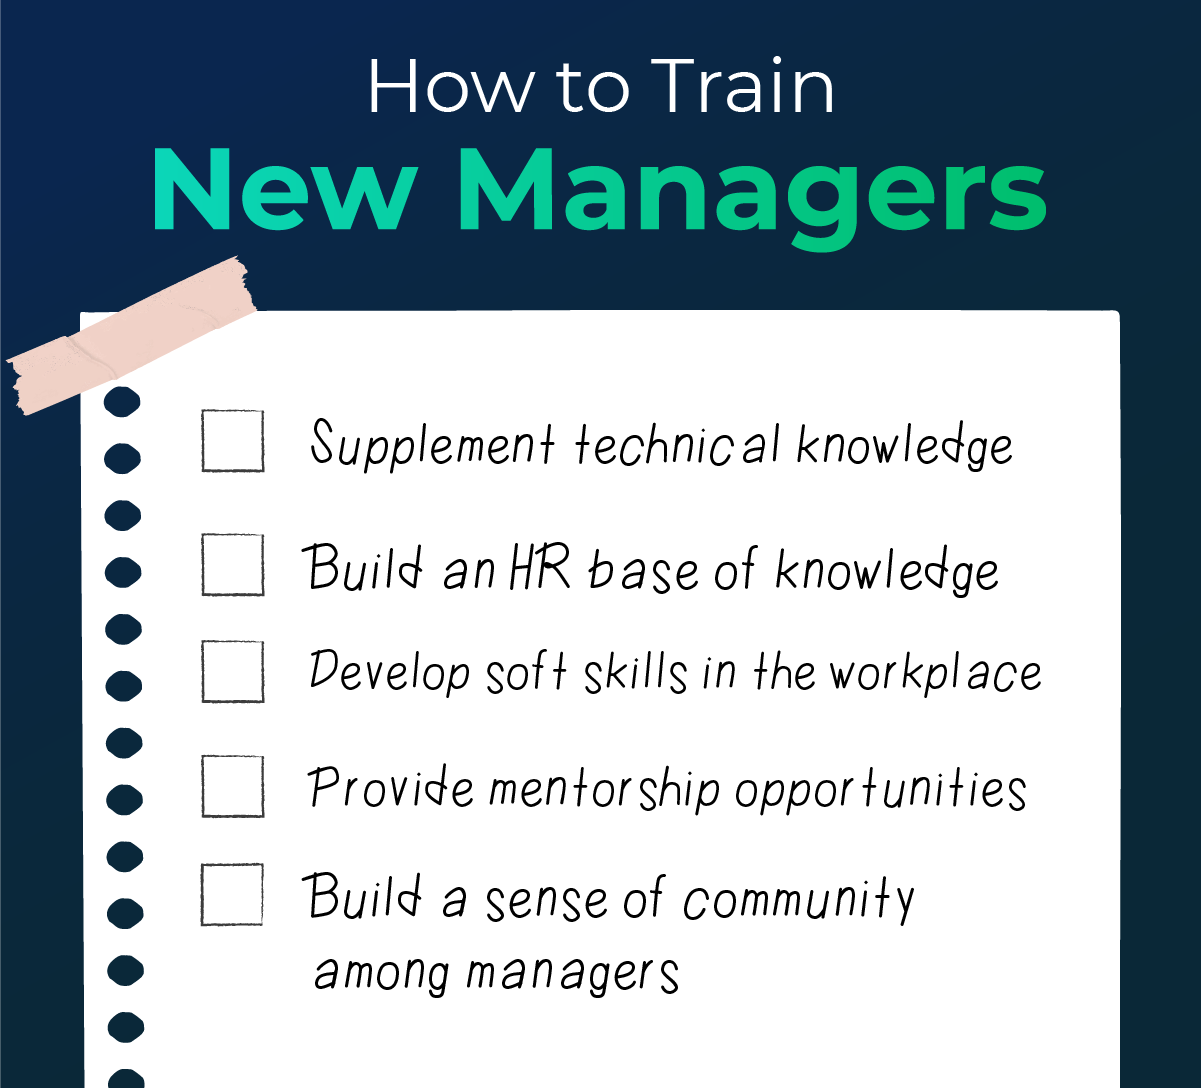 Checklist listing strategies on how to train new managers